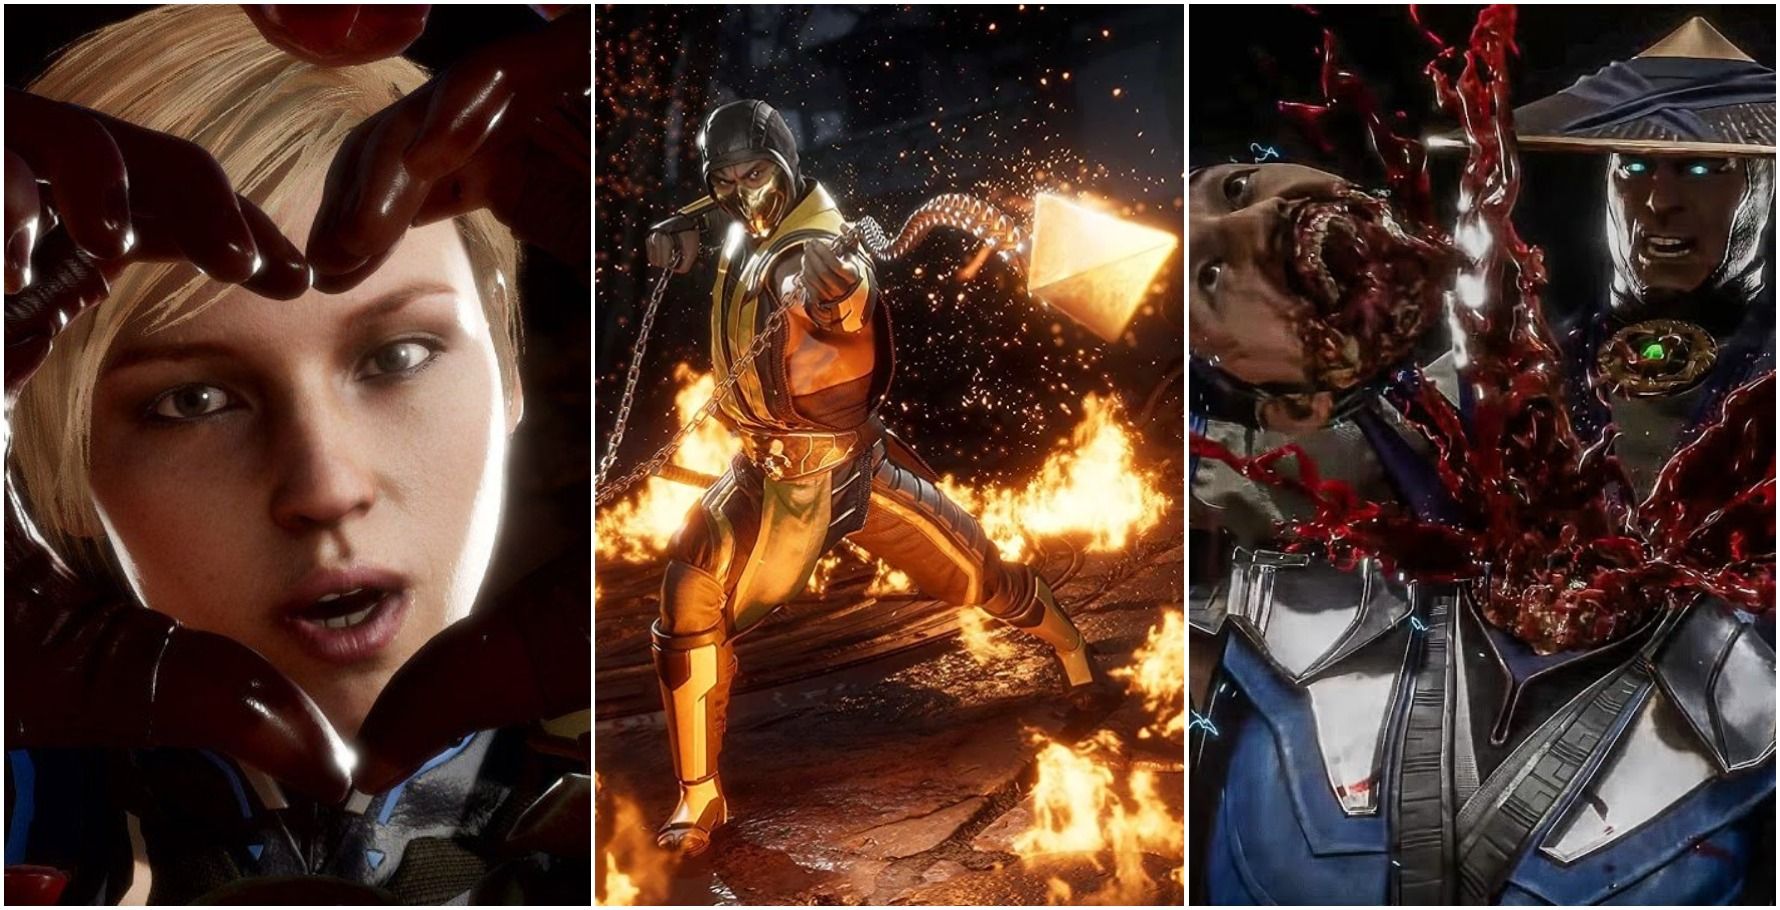 The 10 goriest Mortal Kombat 11 fatalities and how to pull them off